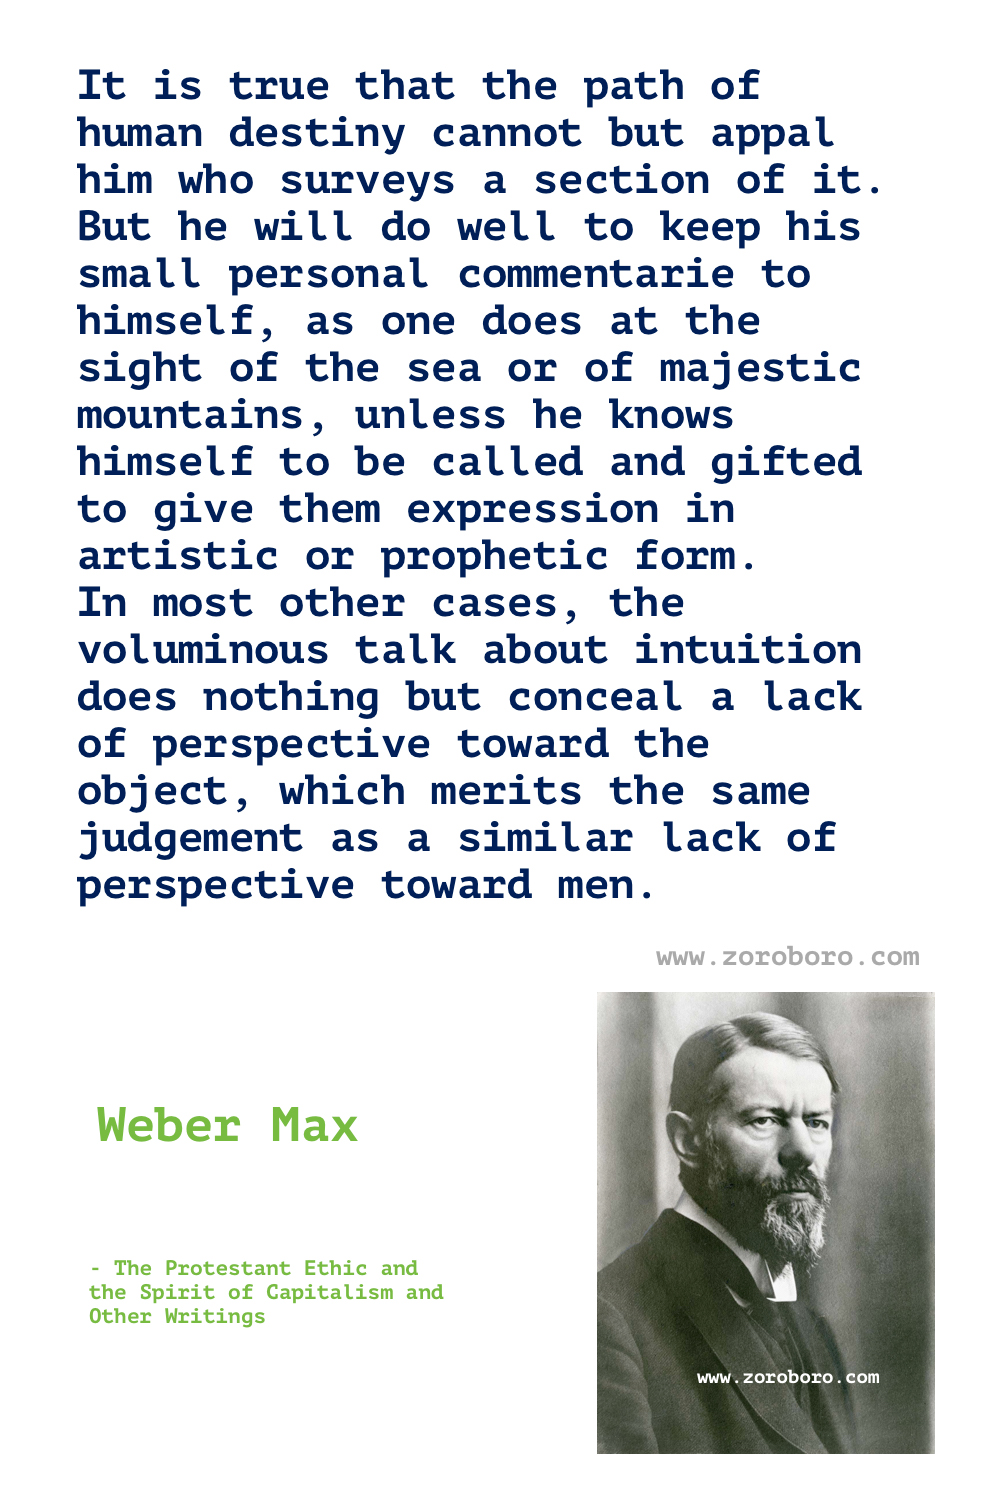 Max Weber Quotes. The Protestant Ethic and the Spirit of Capitalism. Max Weber Books Quotes. Sociology. Bureaucracy. Max Weber Quotes